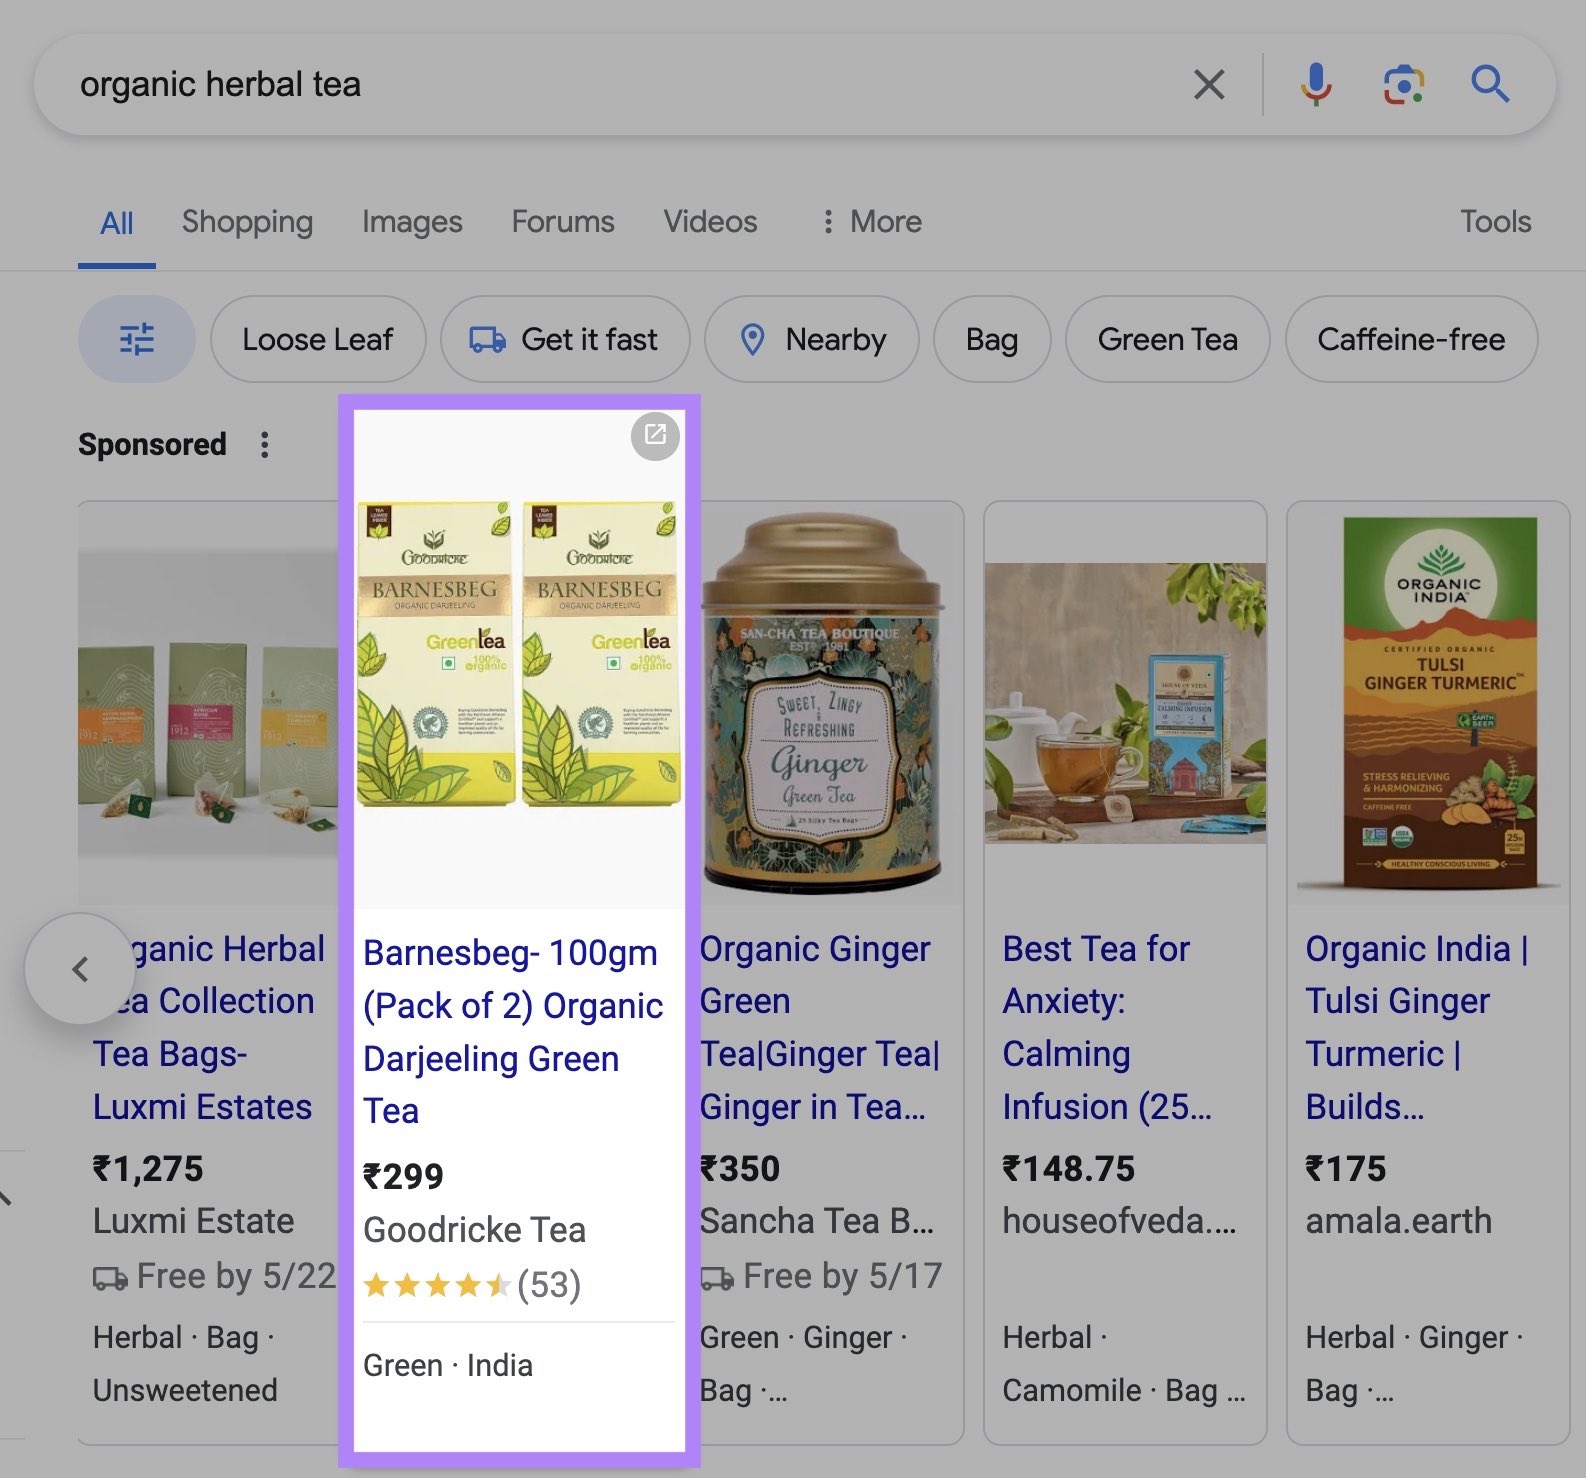 Listing on Google SERP using schema markup to display information about the product like an image, price, and star rating.